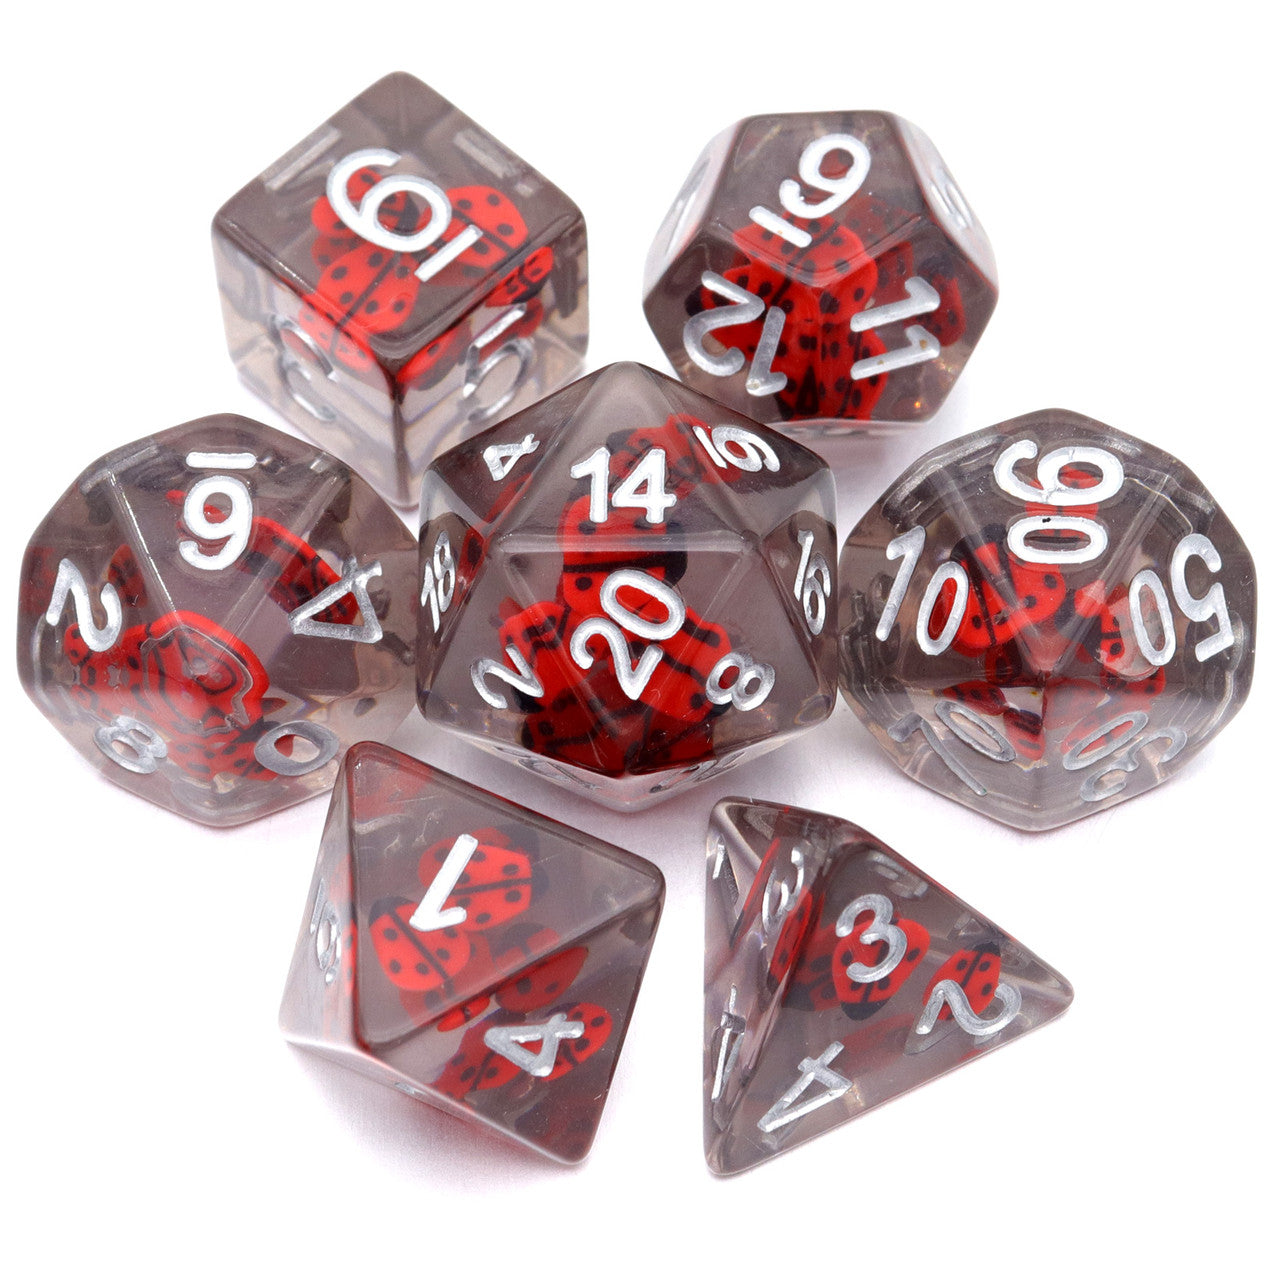 lady bug dice, resin dice, filled dice, red dice, grey dice, insect dice, rpg dice, polyhedral dice